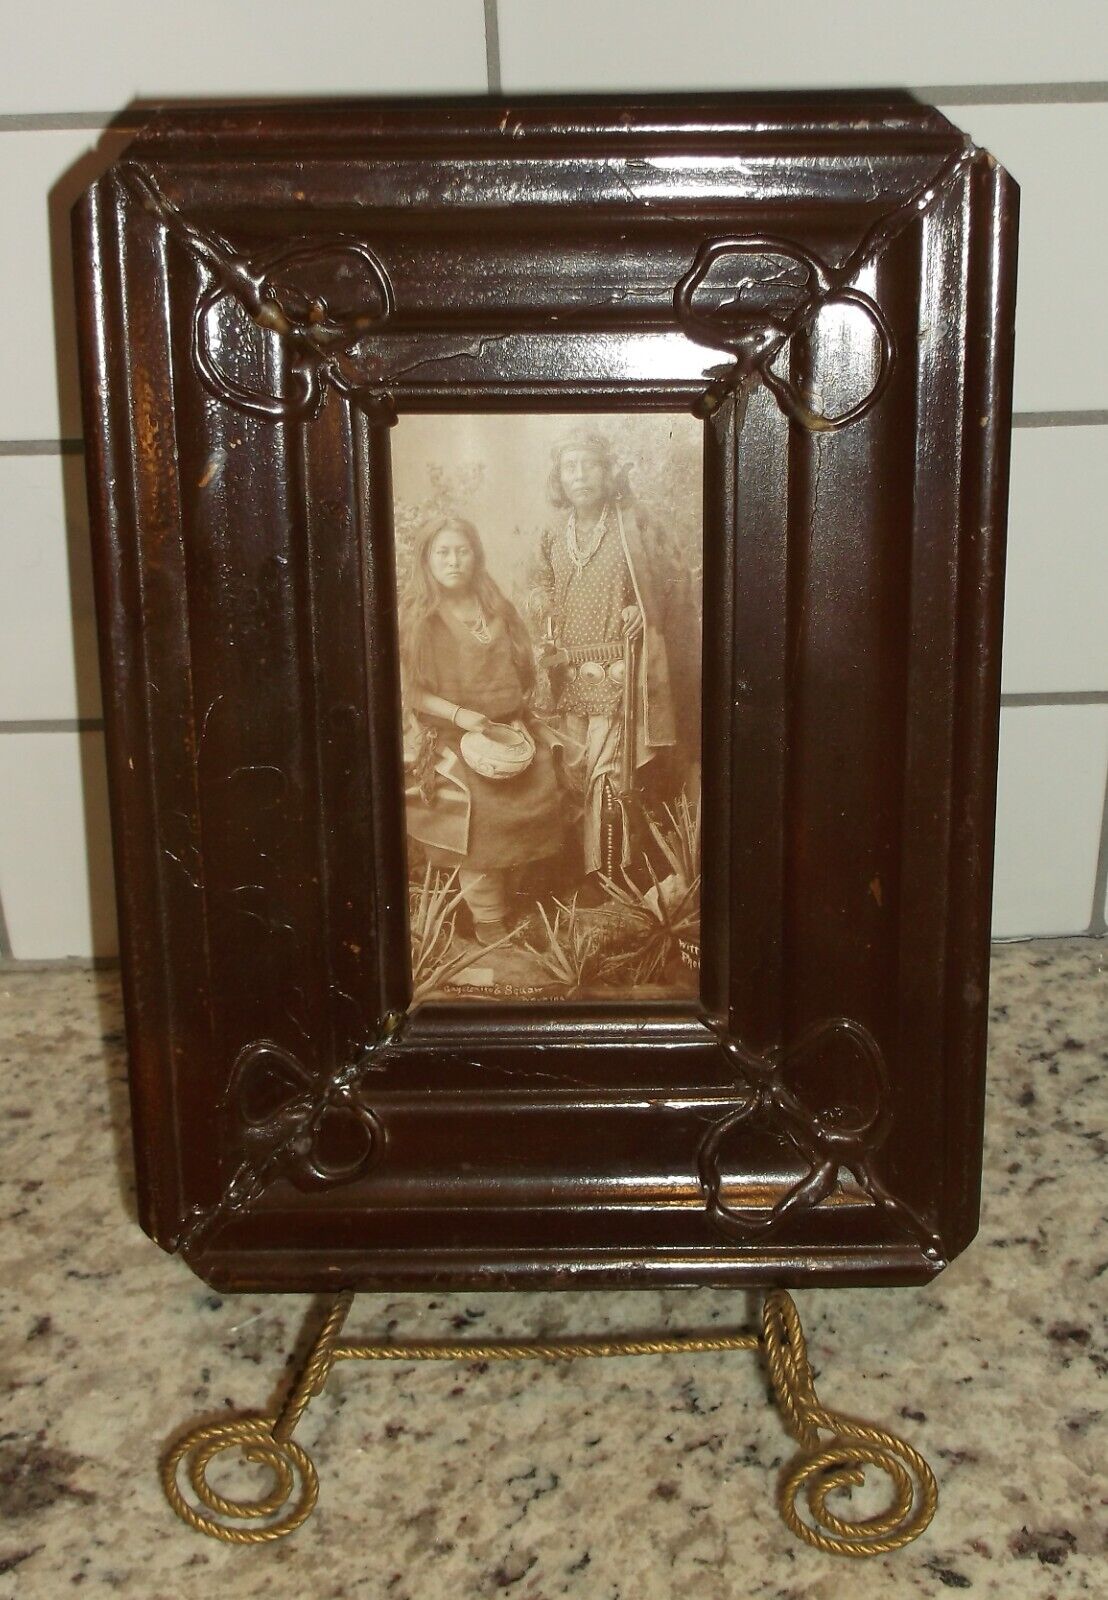 ANTIQUE NATIVE AMERICAN NAVAJOS PHOTOGRAPH IN PERIOD WOOD FRAME